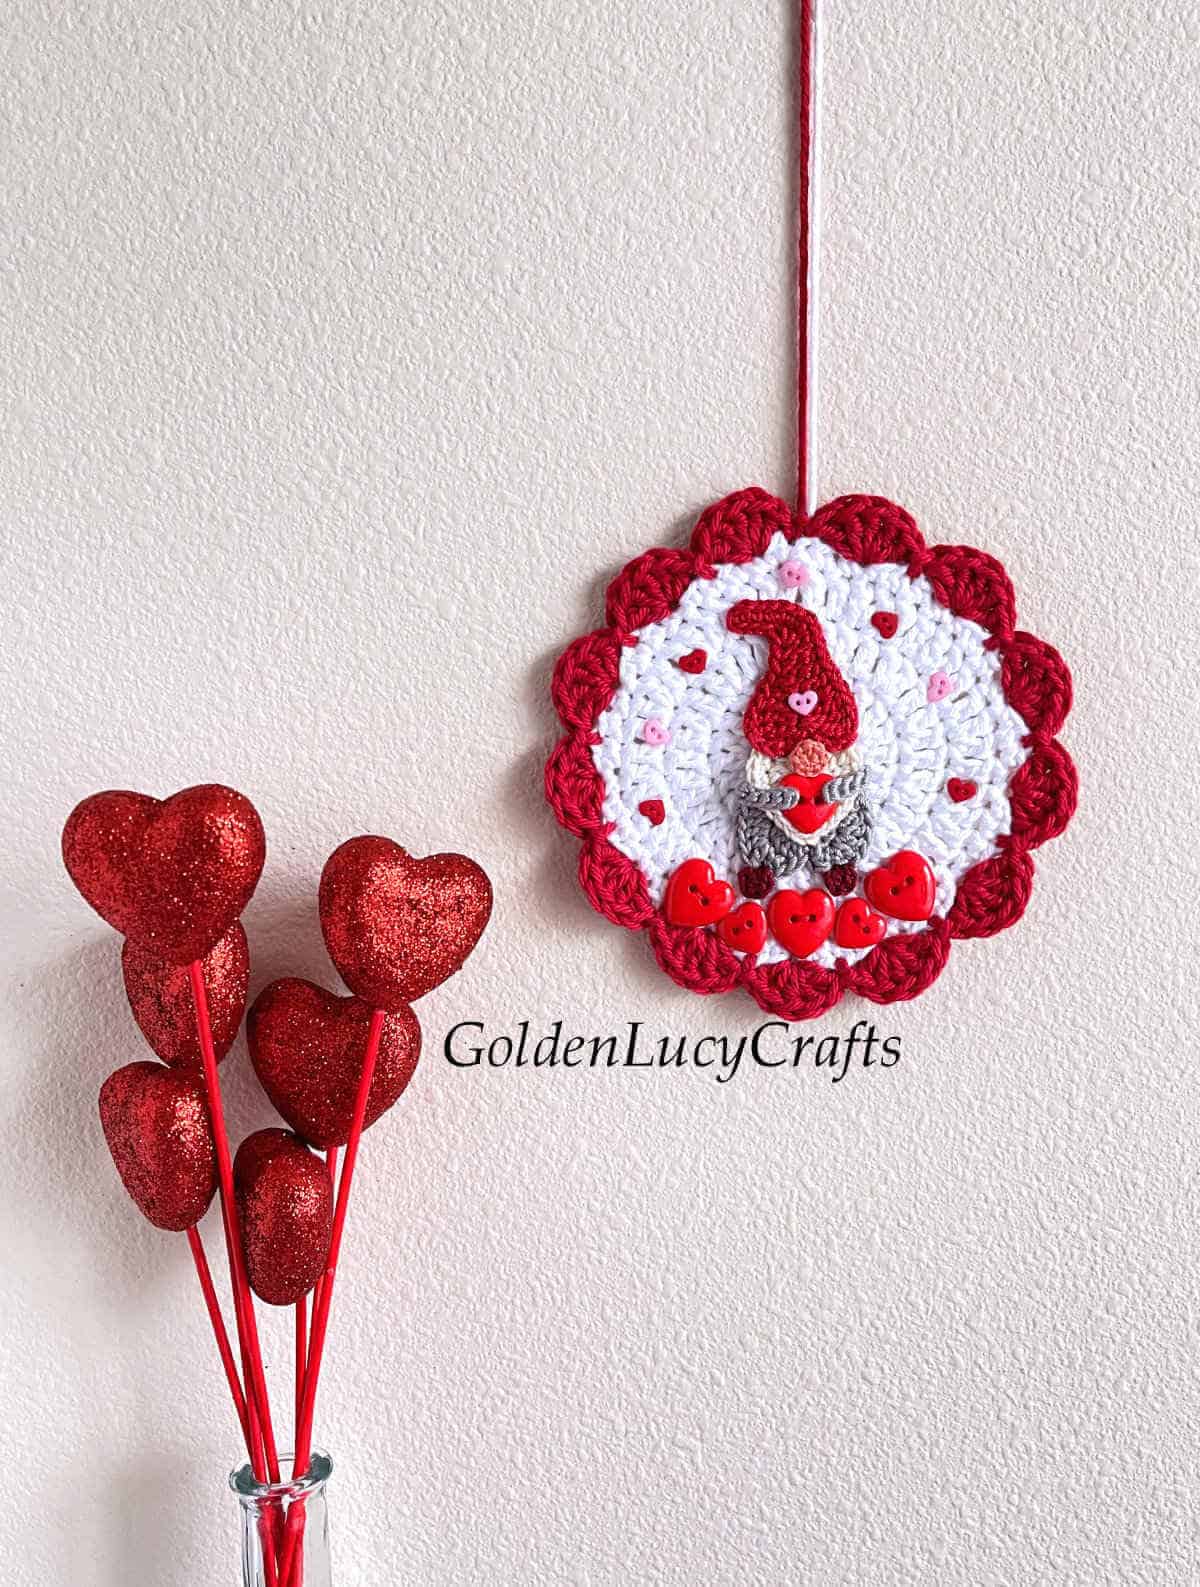 Crochet ornament with gnome on it hanging on the wall, bunch of hearts in a vase next to it.